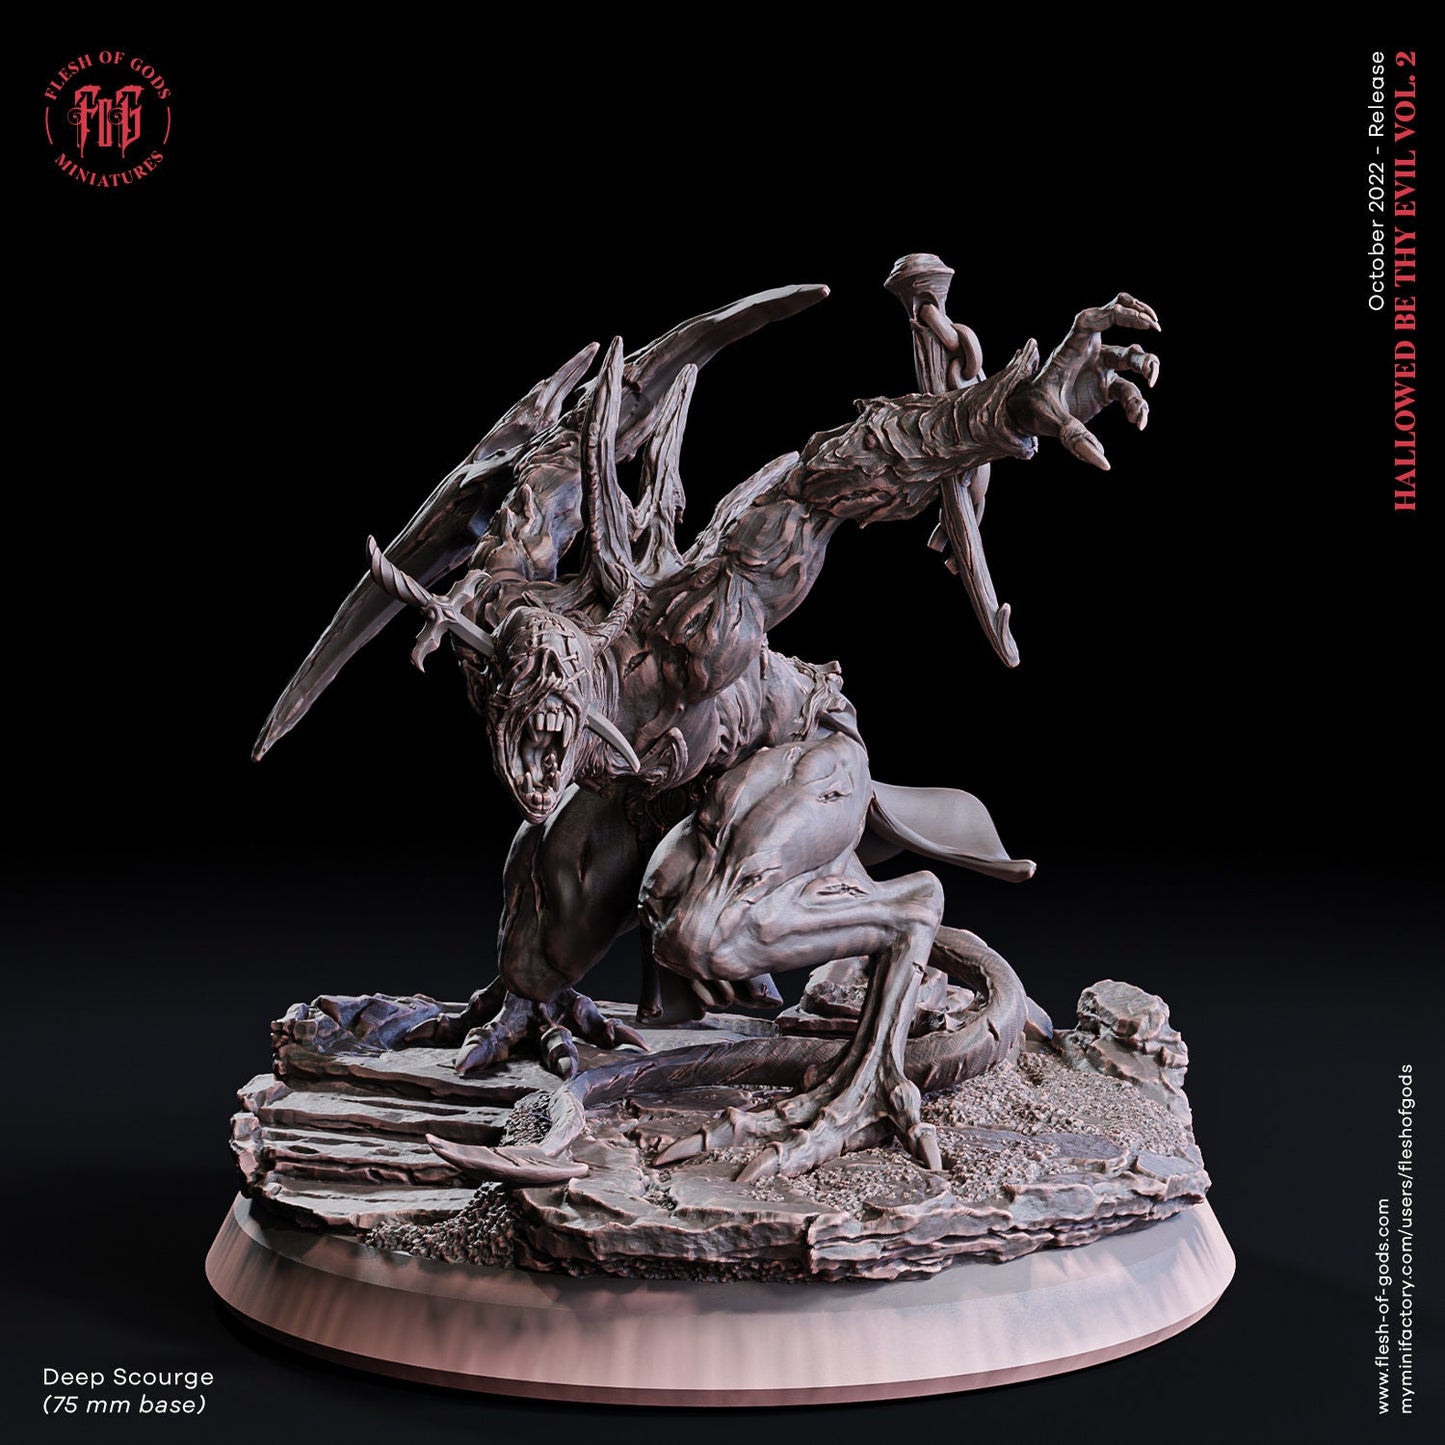 The Deep Scourge | Flesh of Gods | Enemy | 3D Printed Resin Miniature | Dungeons and Dragons | Pathfinder | Tabletop Role Playing | D&D